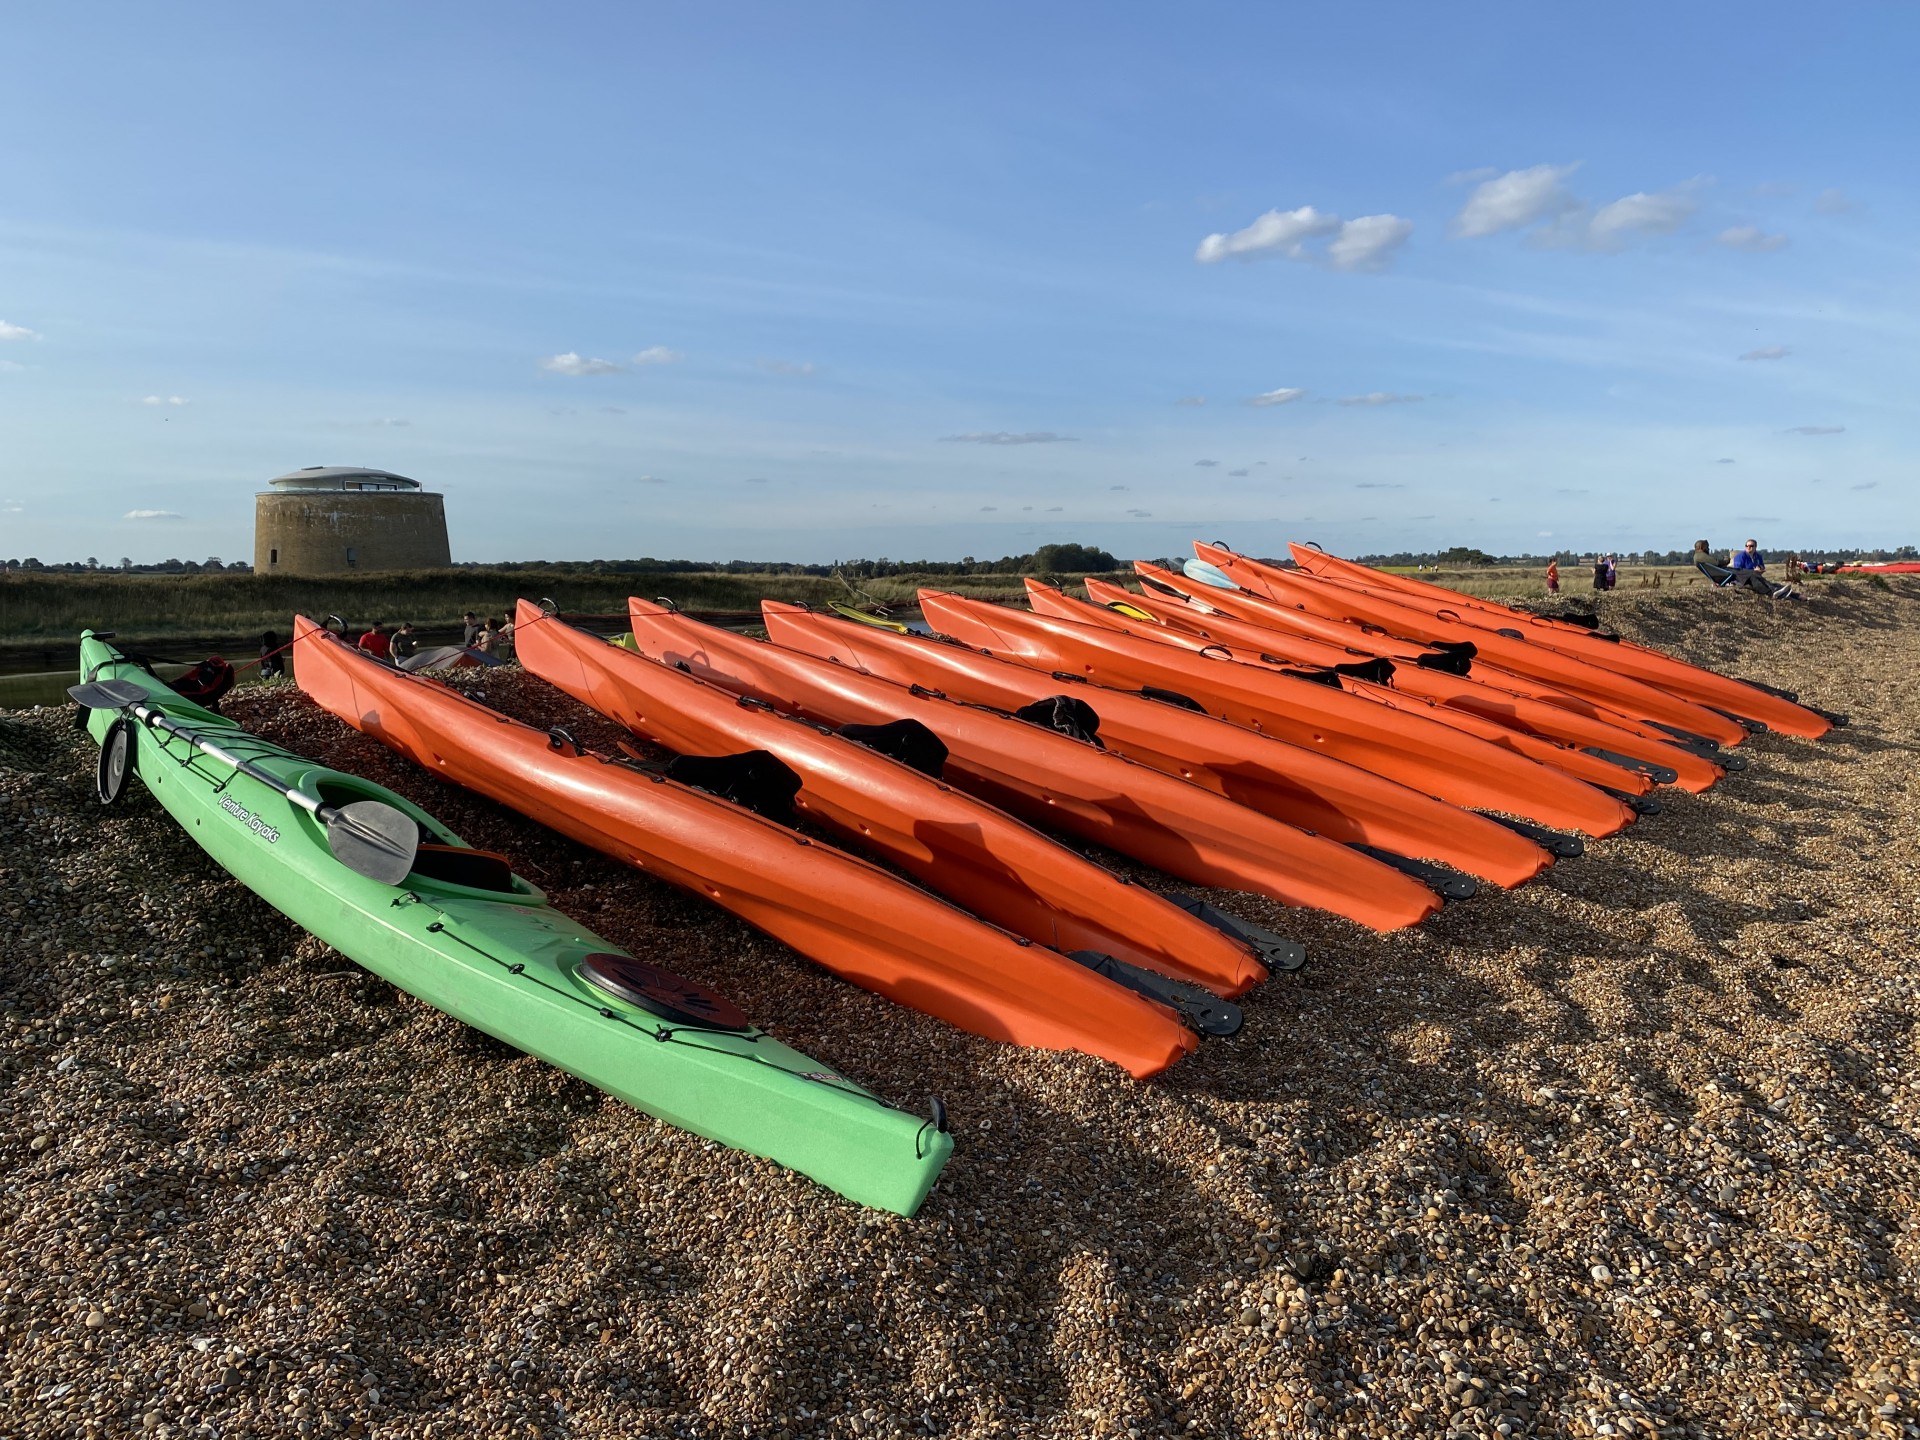 A long line of sit-on-top & touring sea kayaks for wild camping trips and events.